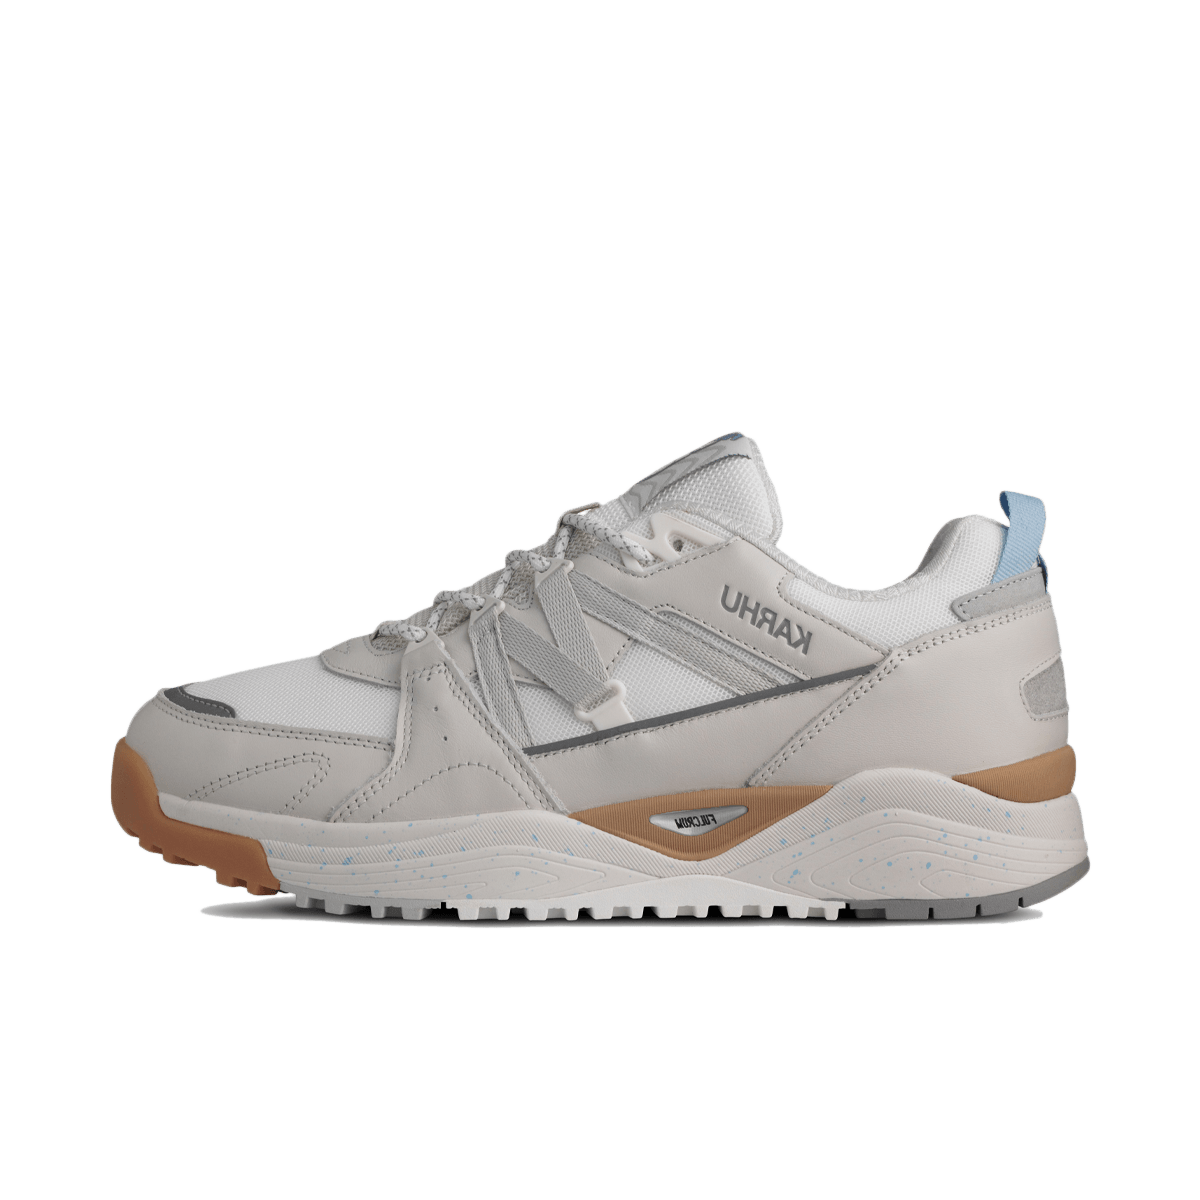 Karhu Fusion XC 'Lily White' - Flow State Pack